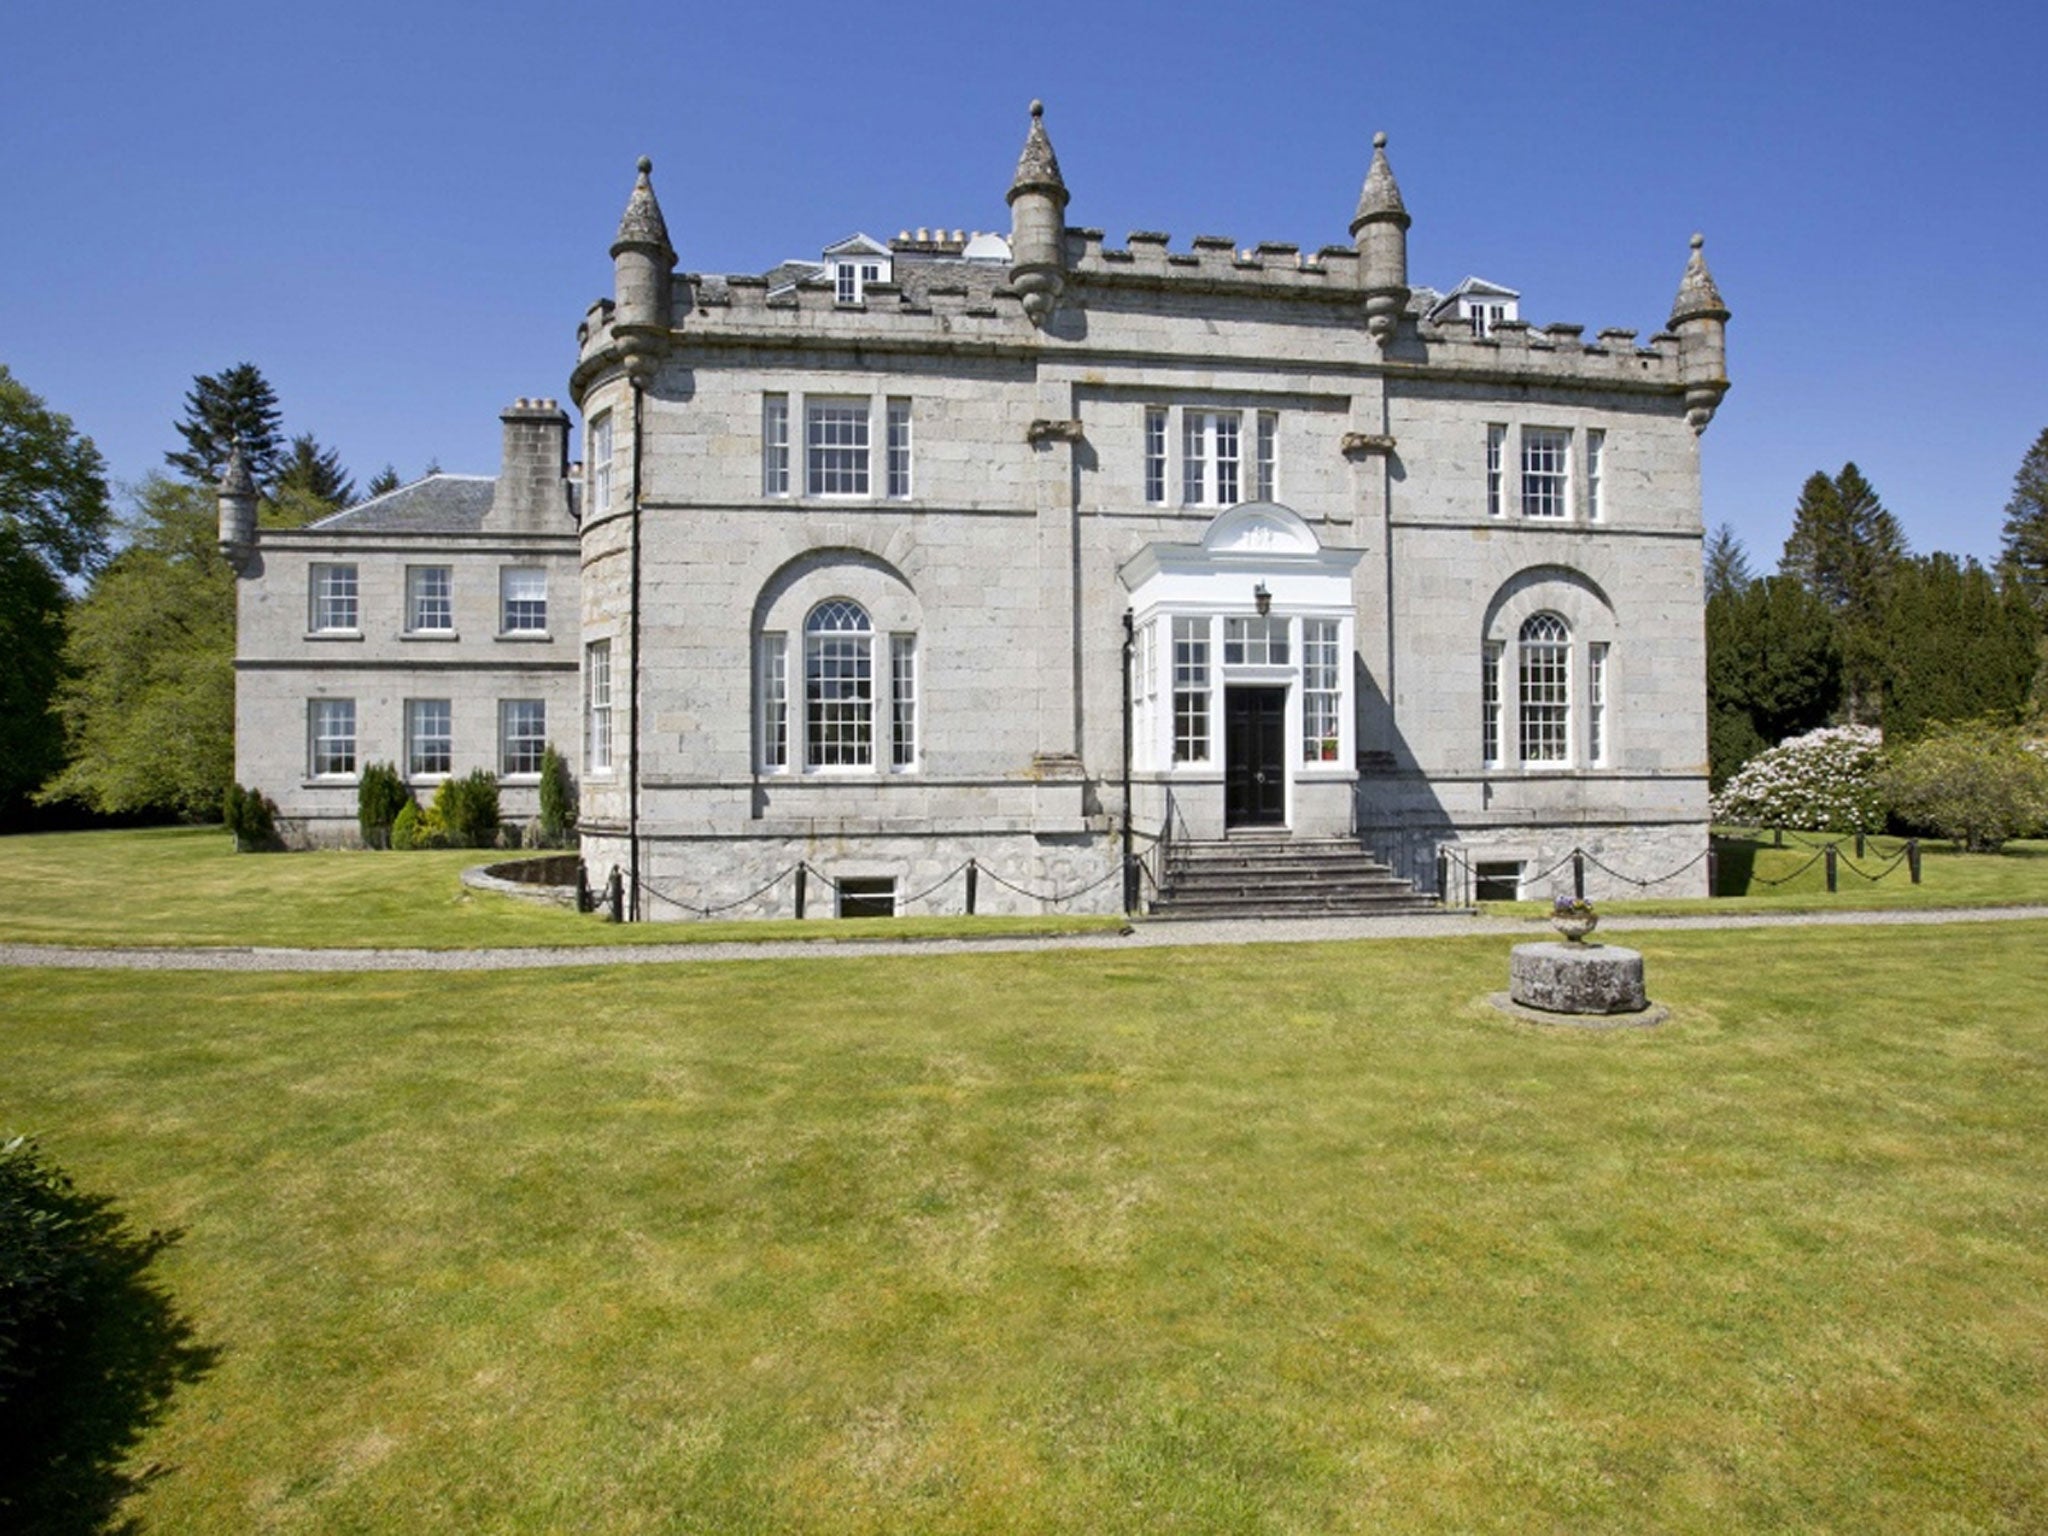 The sporting estate at Laggan in Inverness-shire is on the market for £7.5m